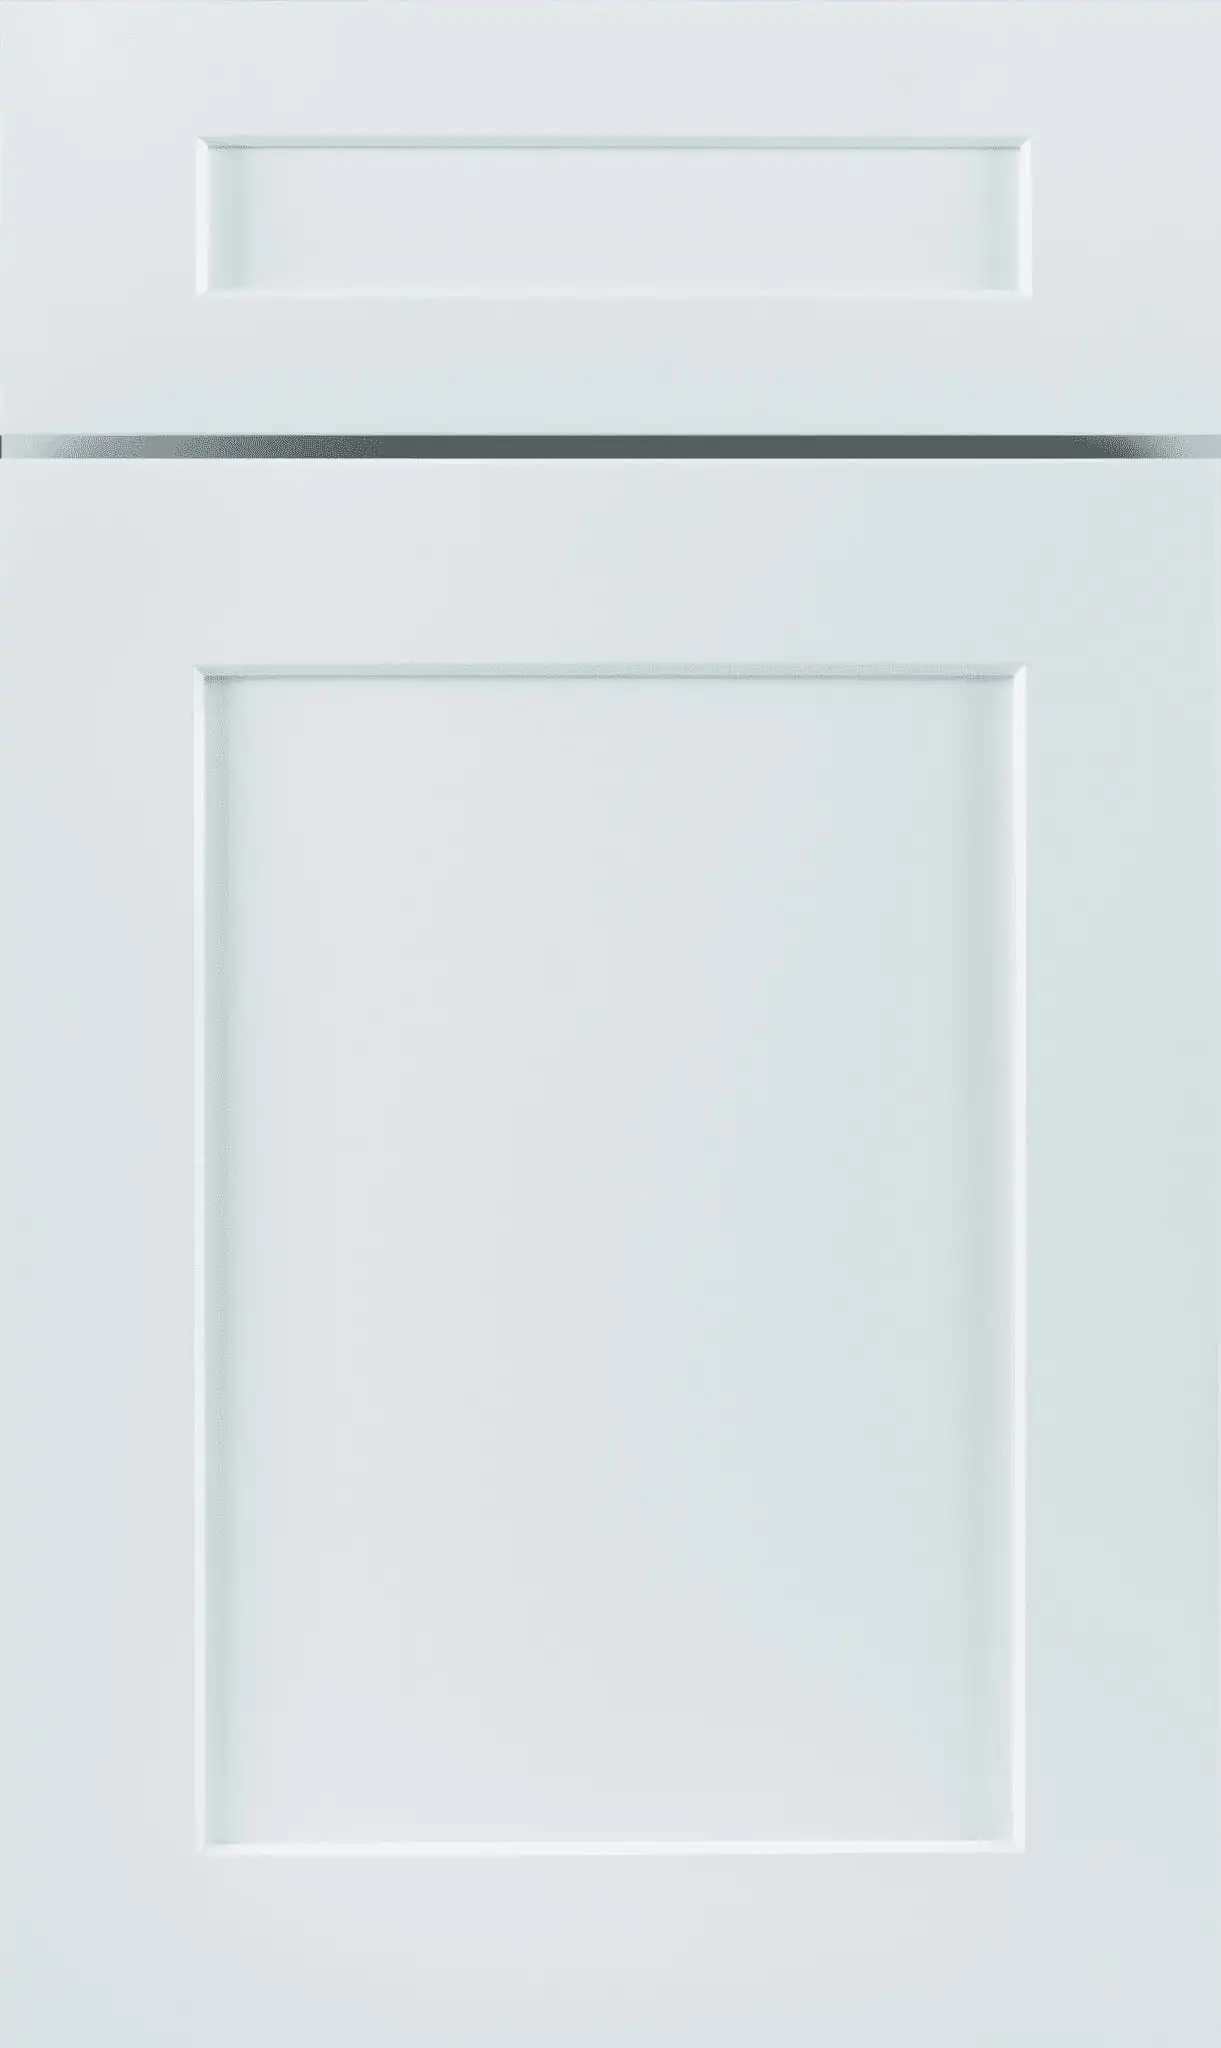 JK S8 White Maple color Shaker style Cabinets Door